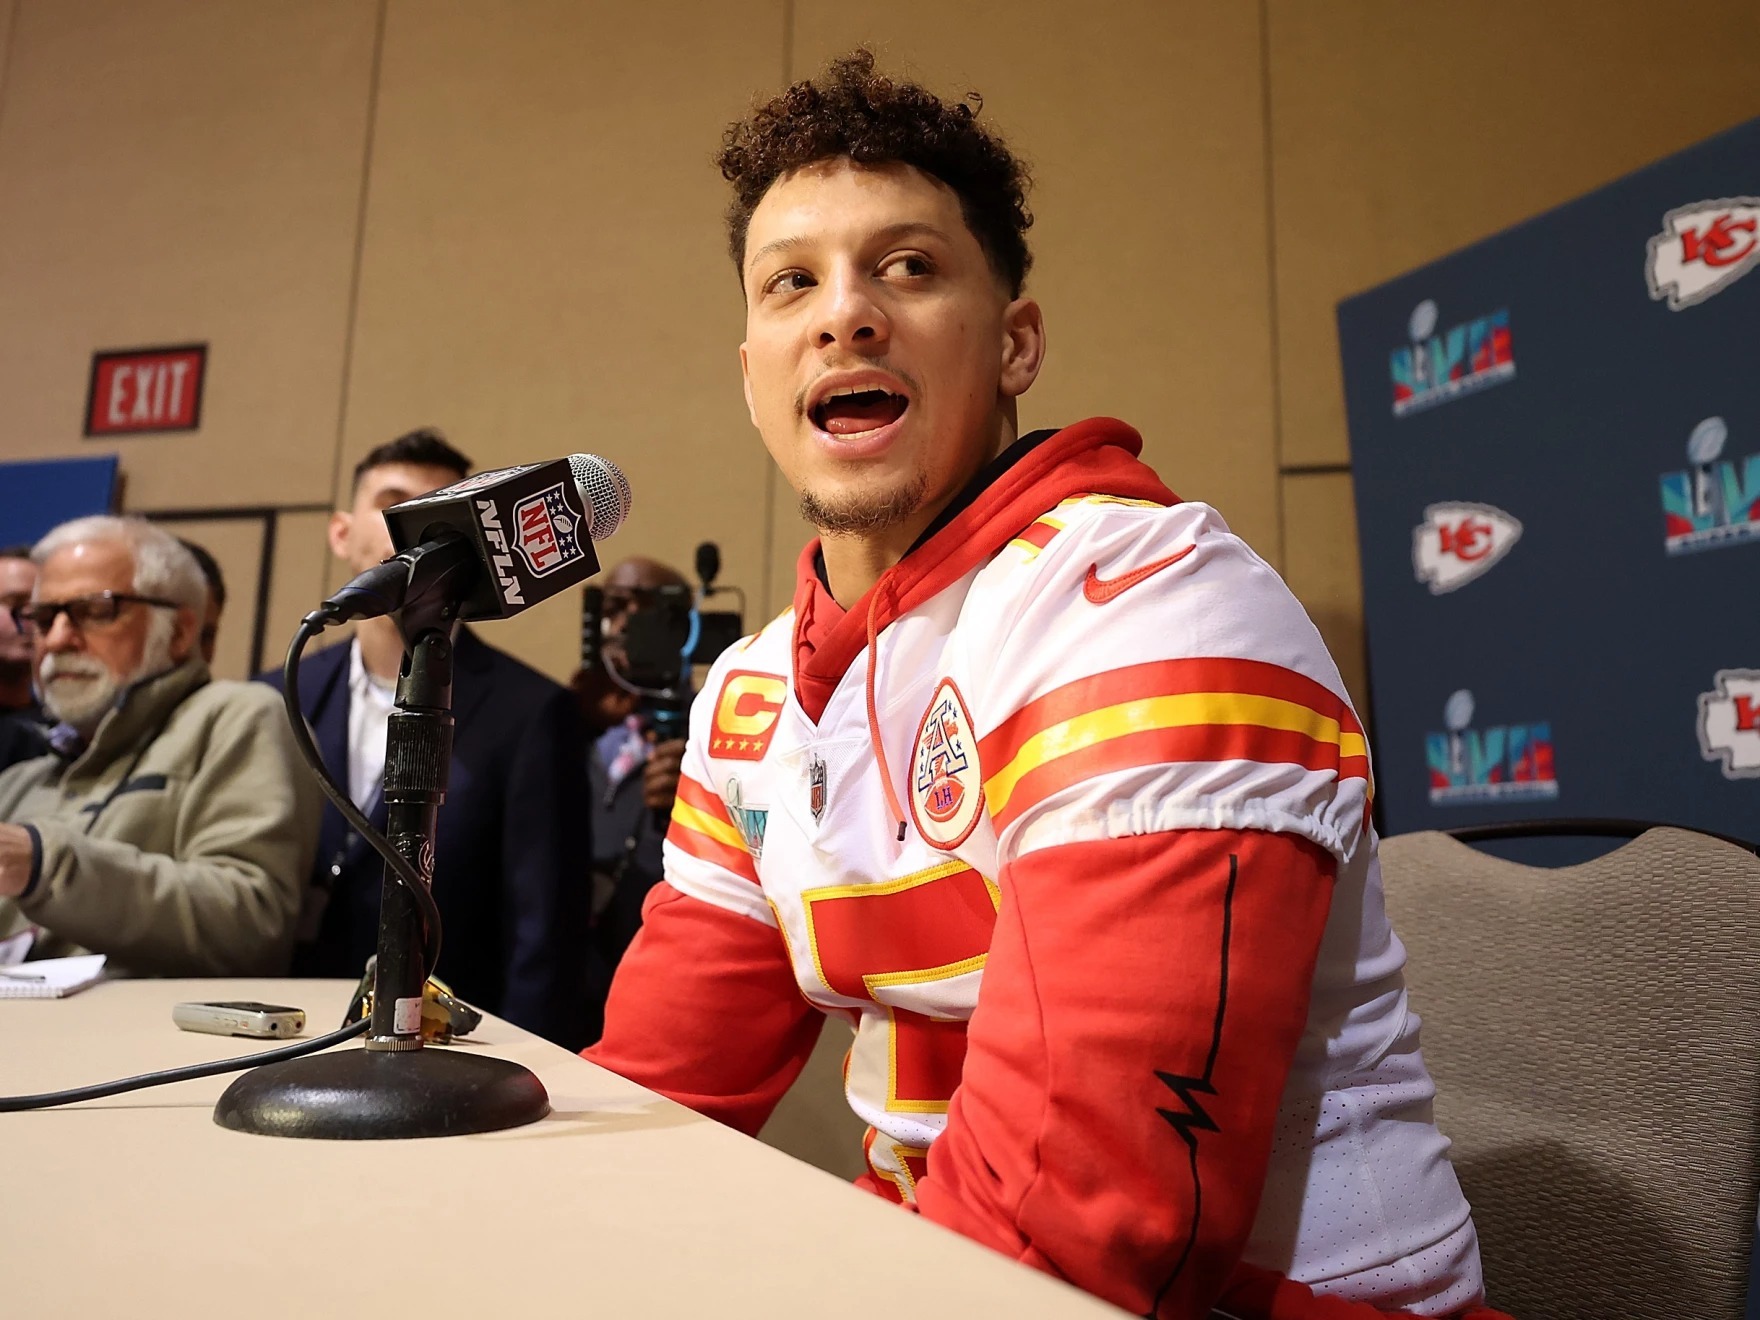 Patrick Mahomes: The promising baseball pitcher who became the face of the NFL